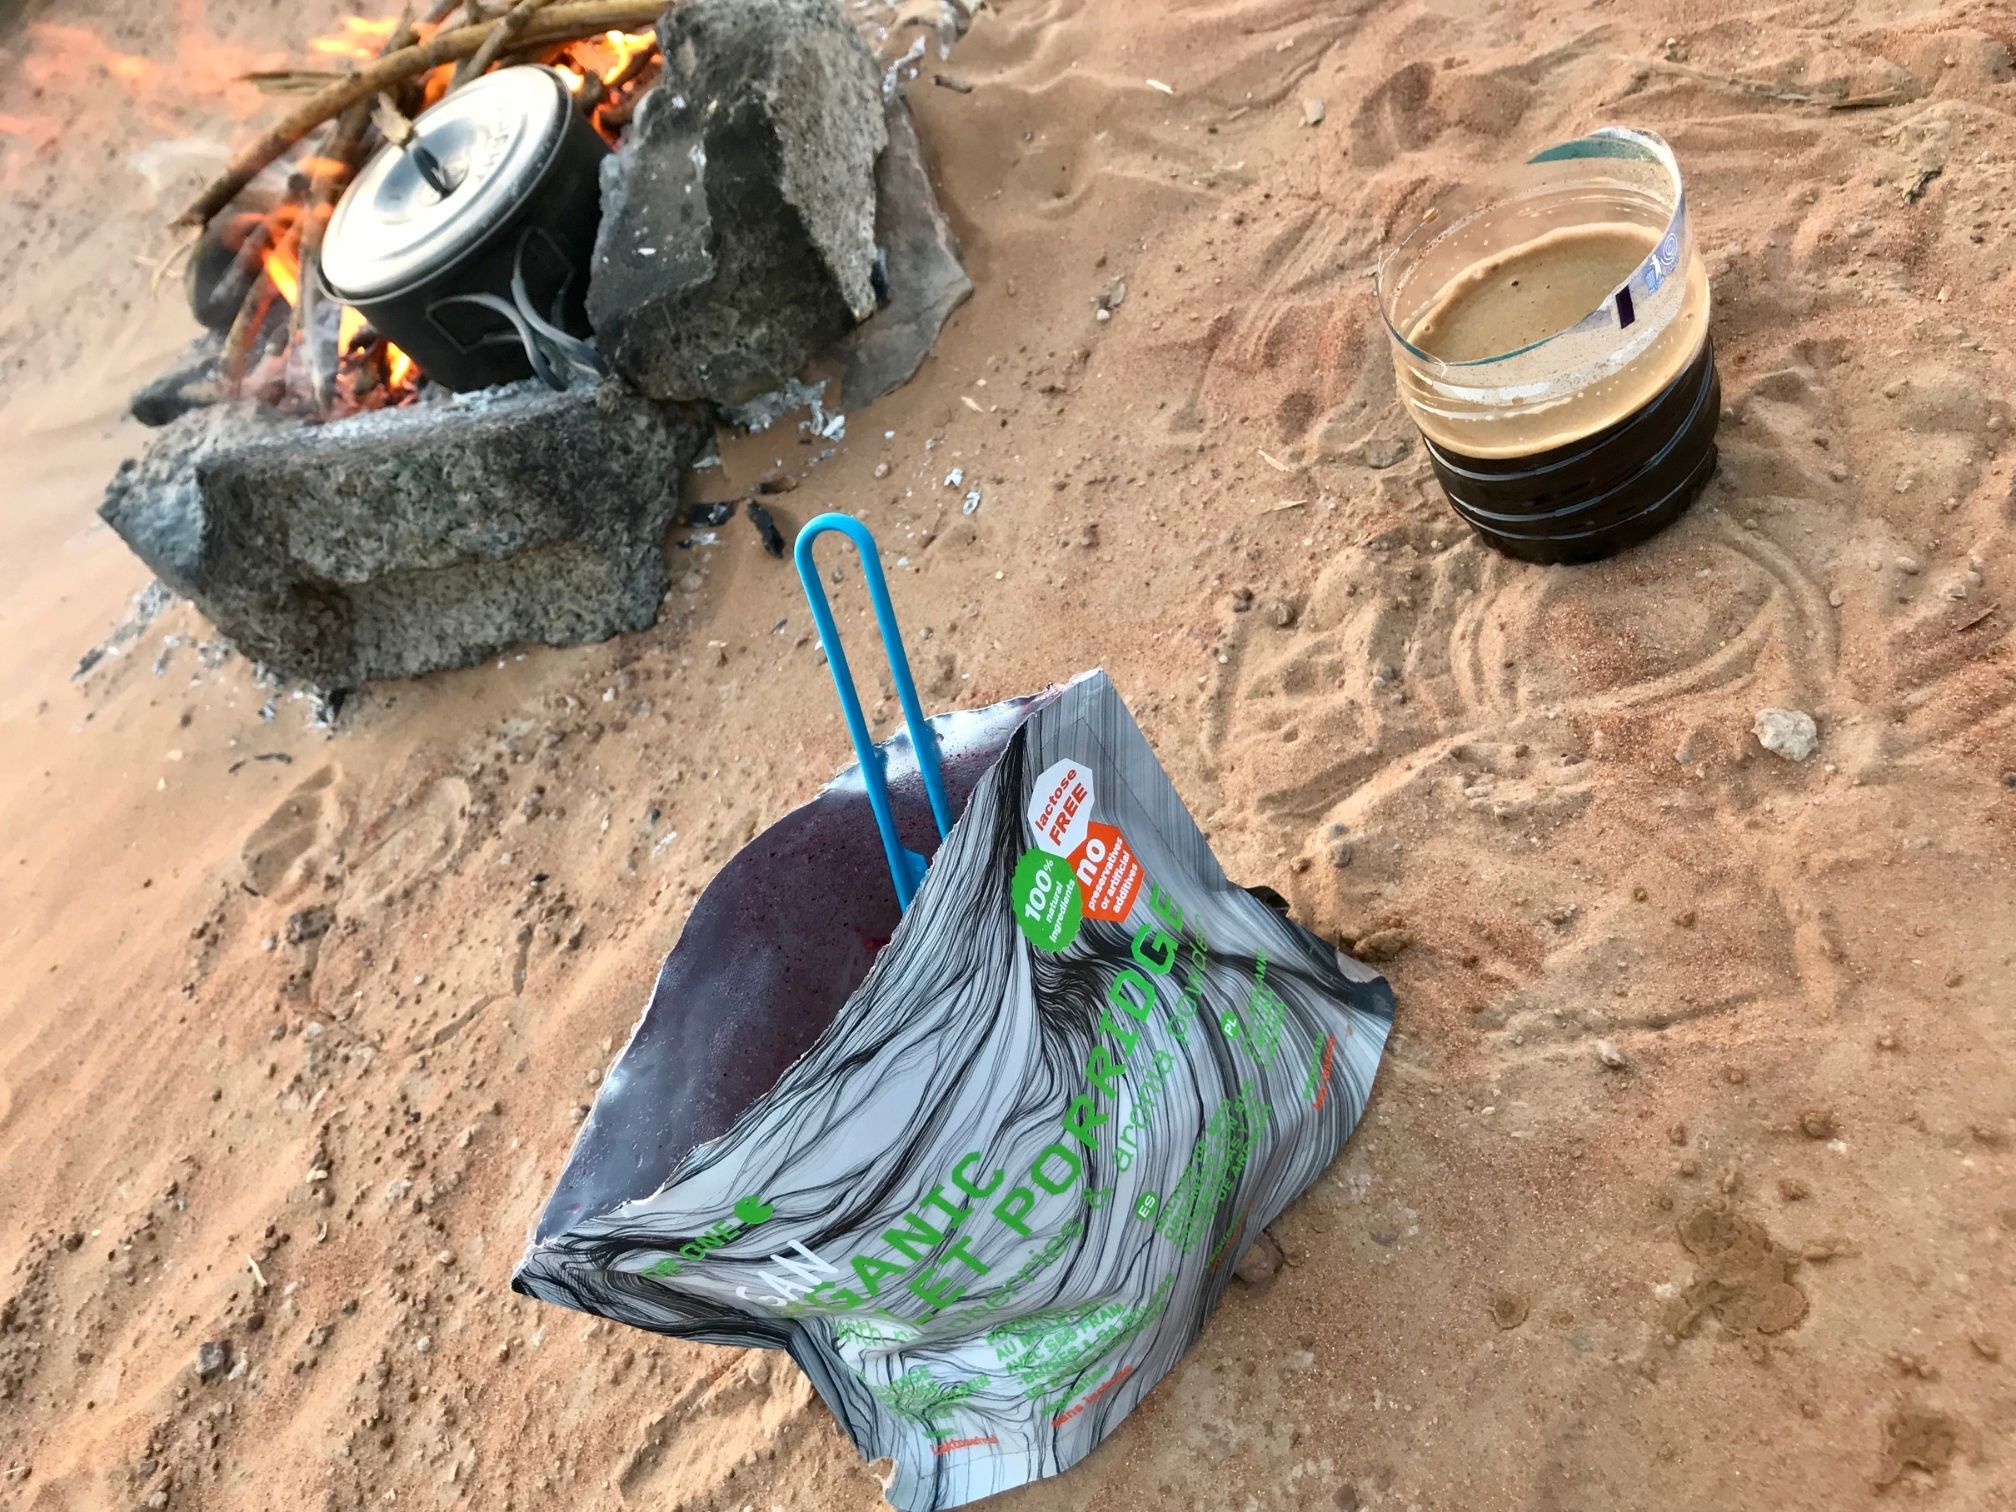 Freeze dried breakfast and coffee in the desert